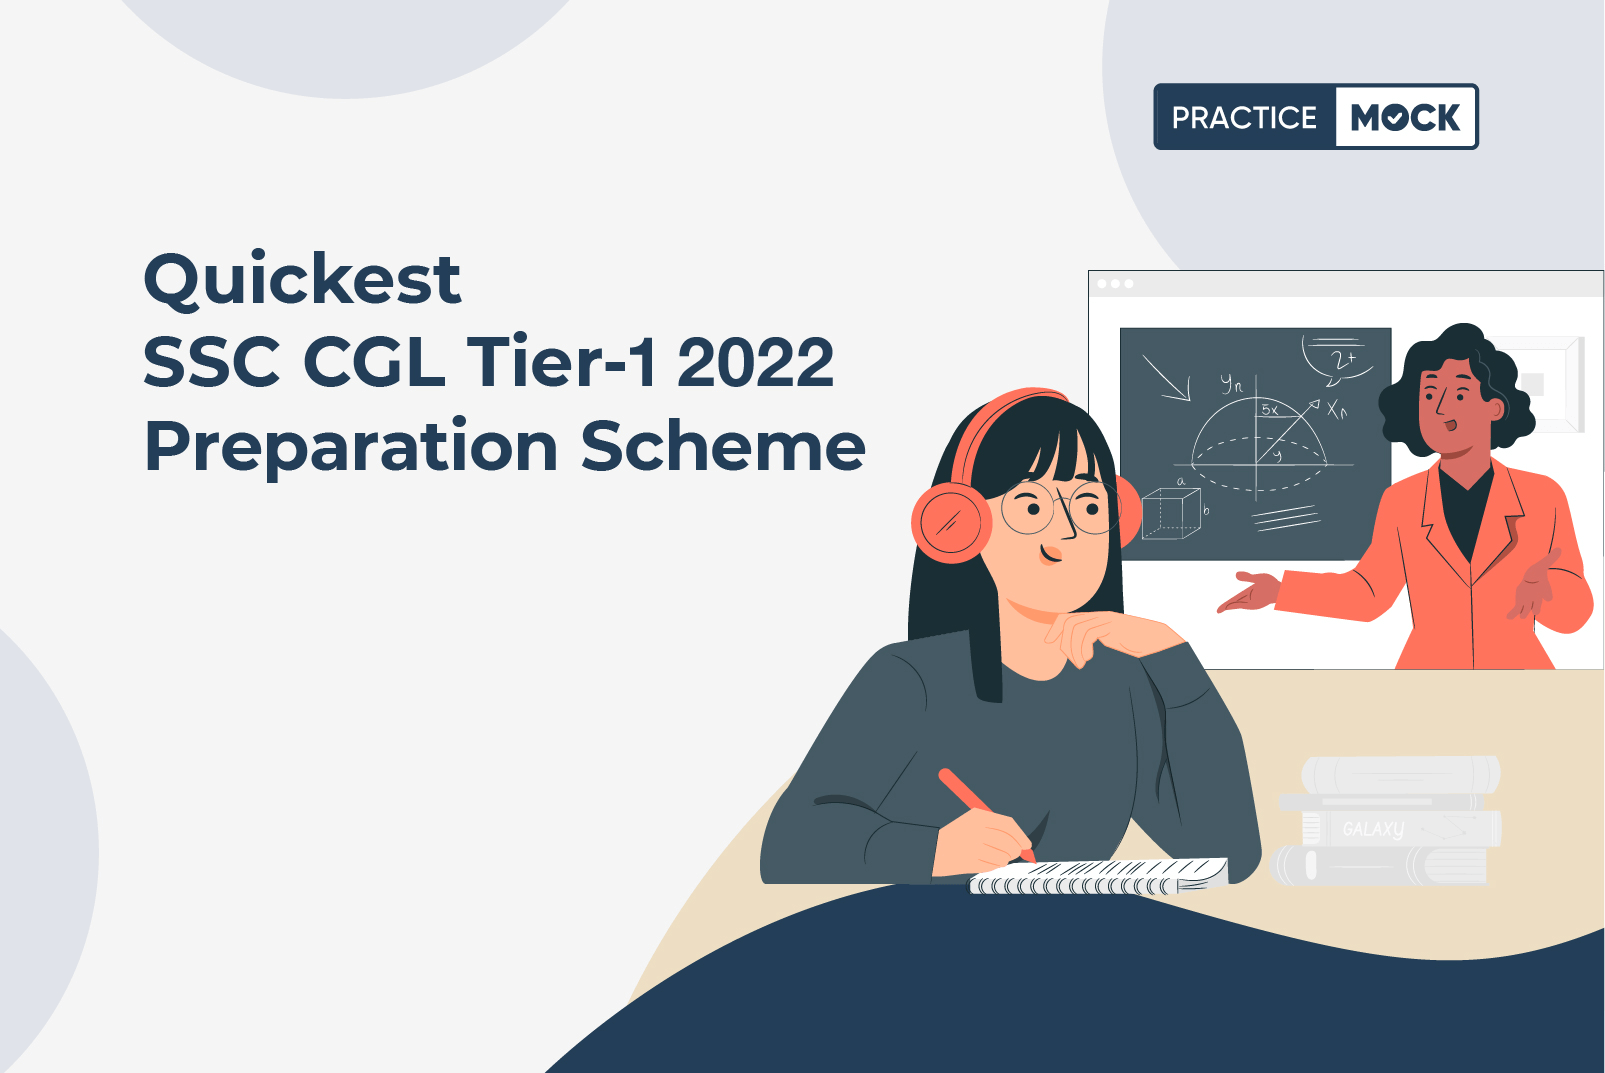 SSC CGL Tier 1 2022-12 Day Mock Test Challenge